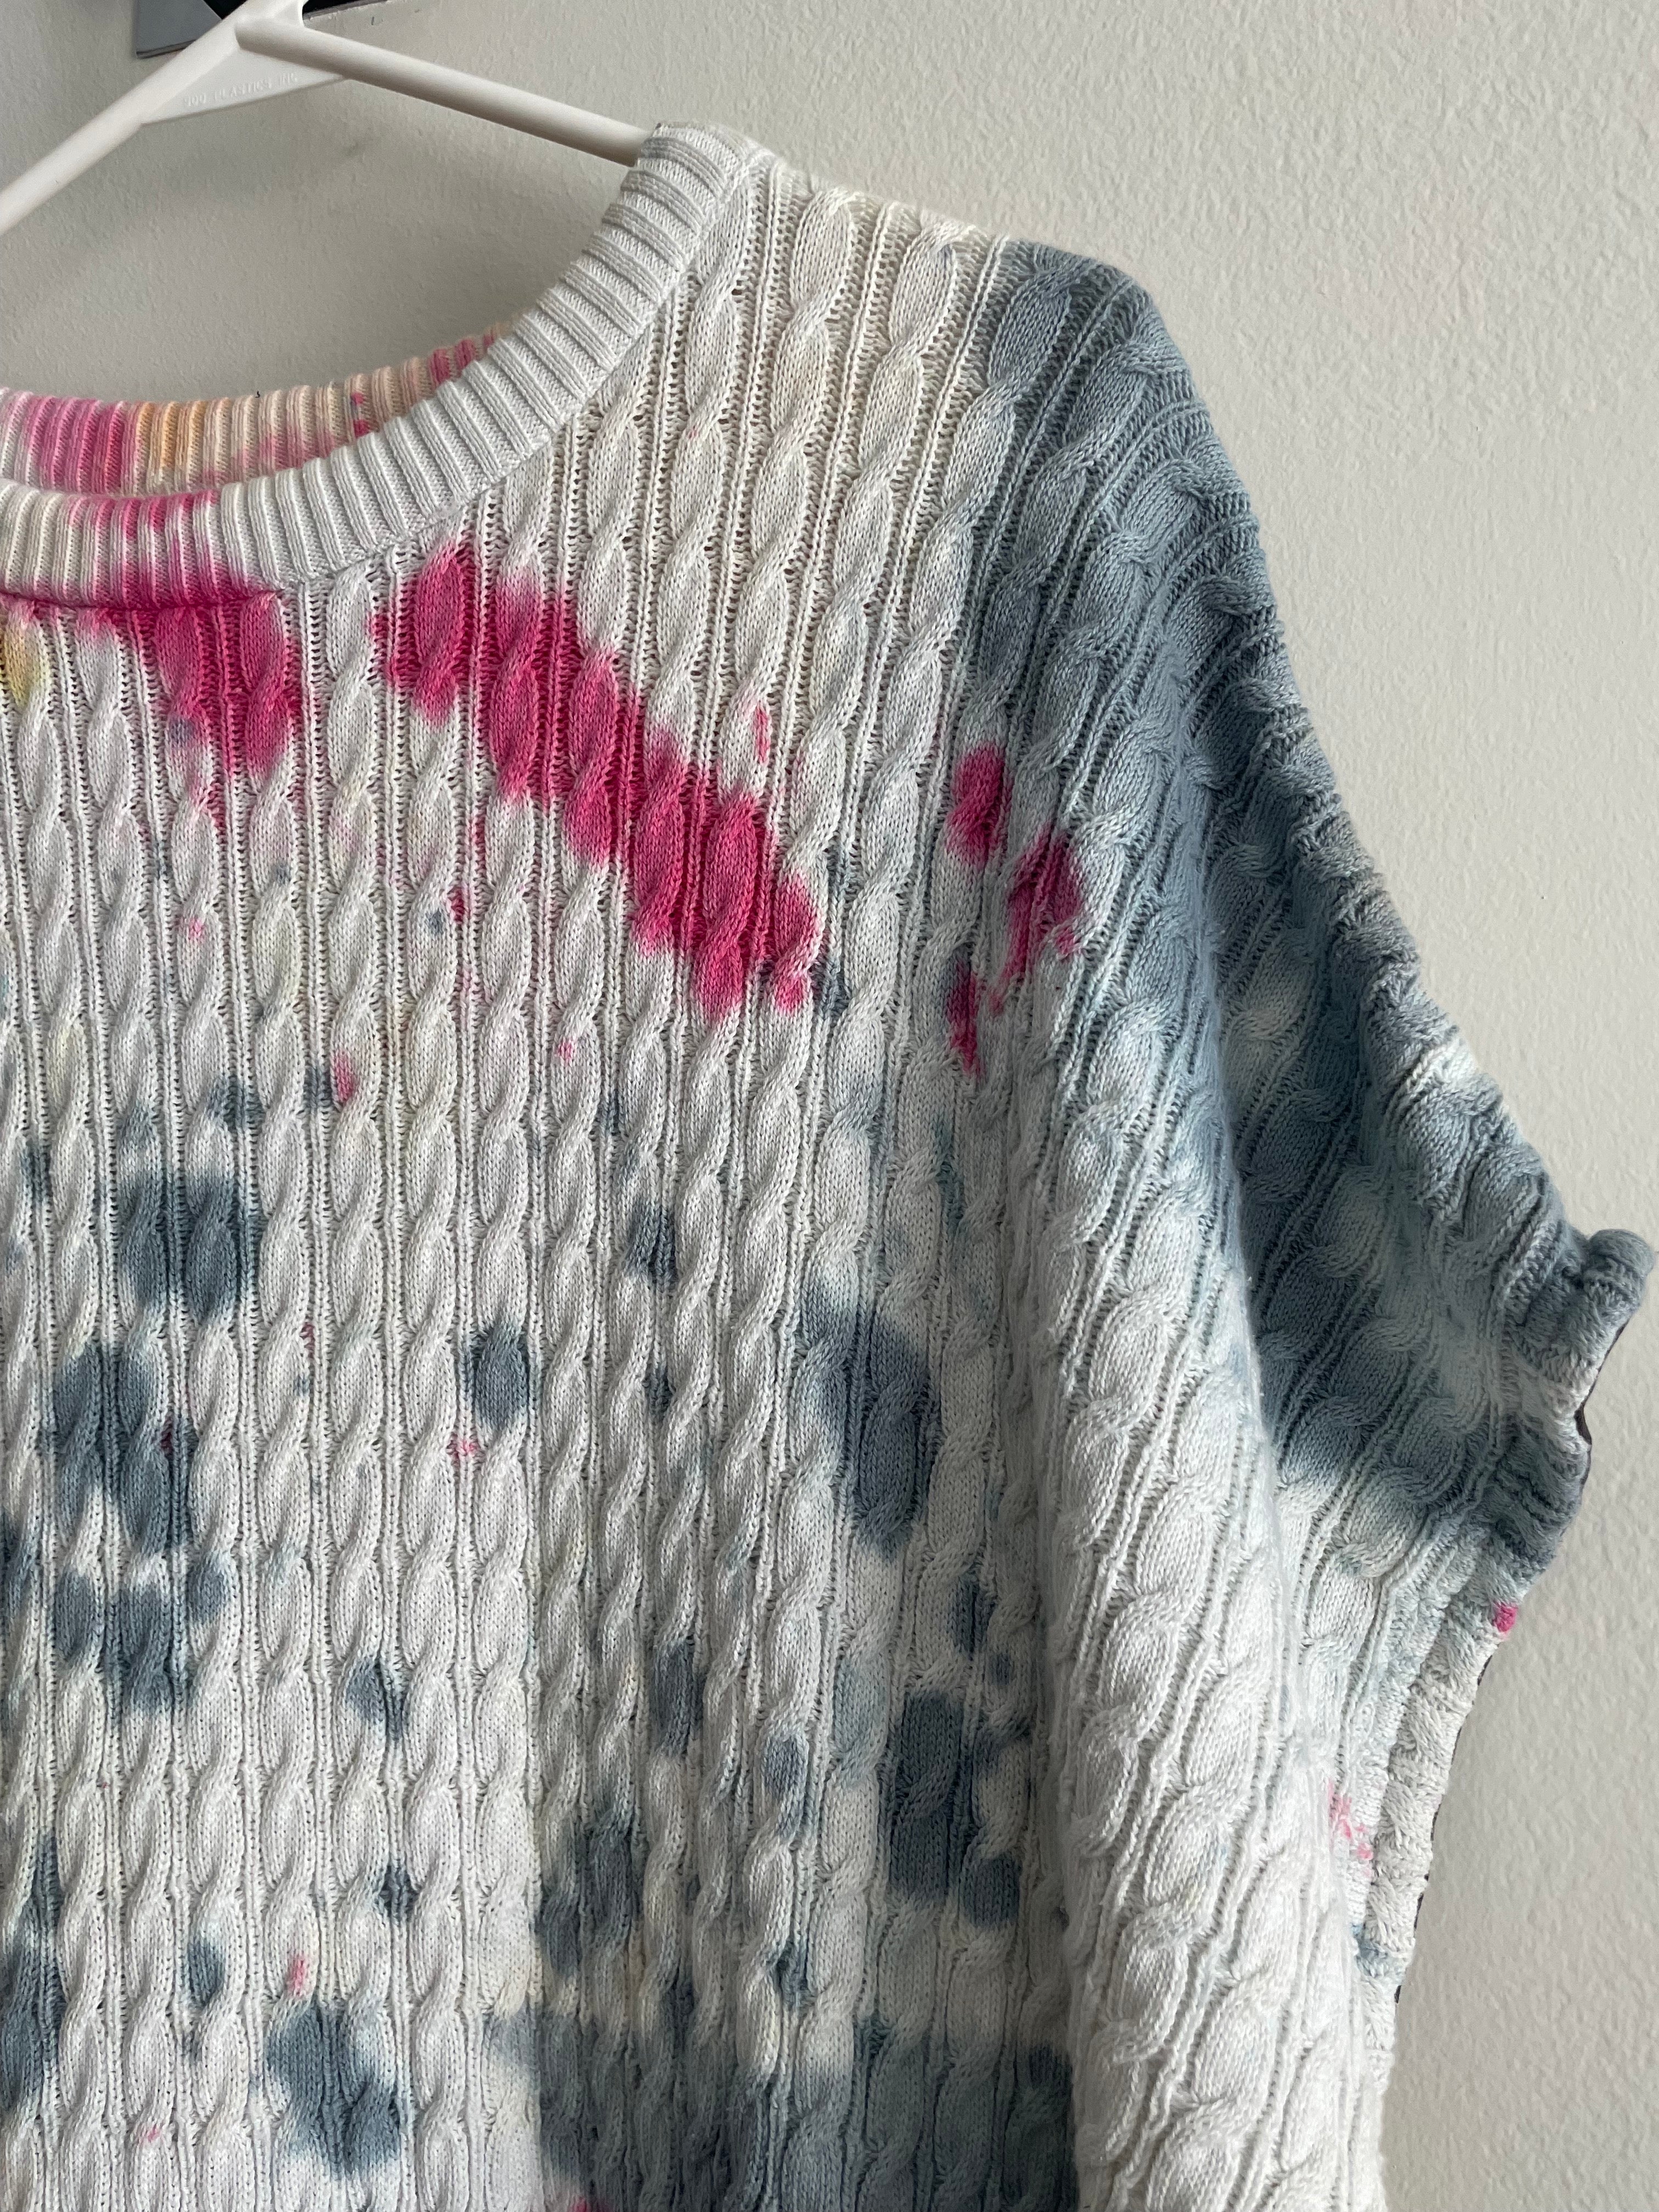 Upcycled Sweater Tunic - Sample Sale